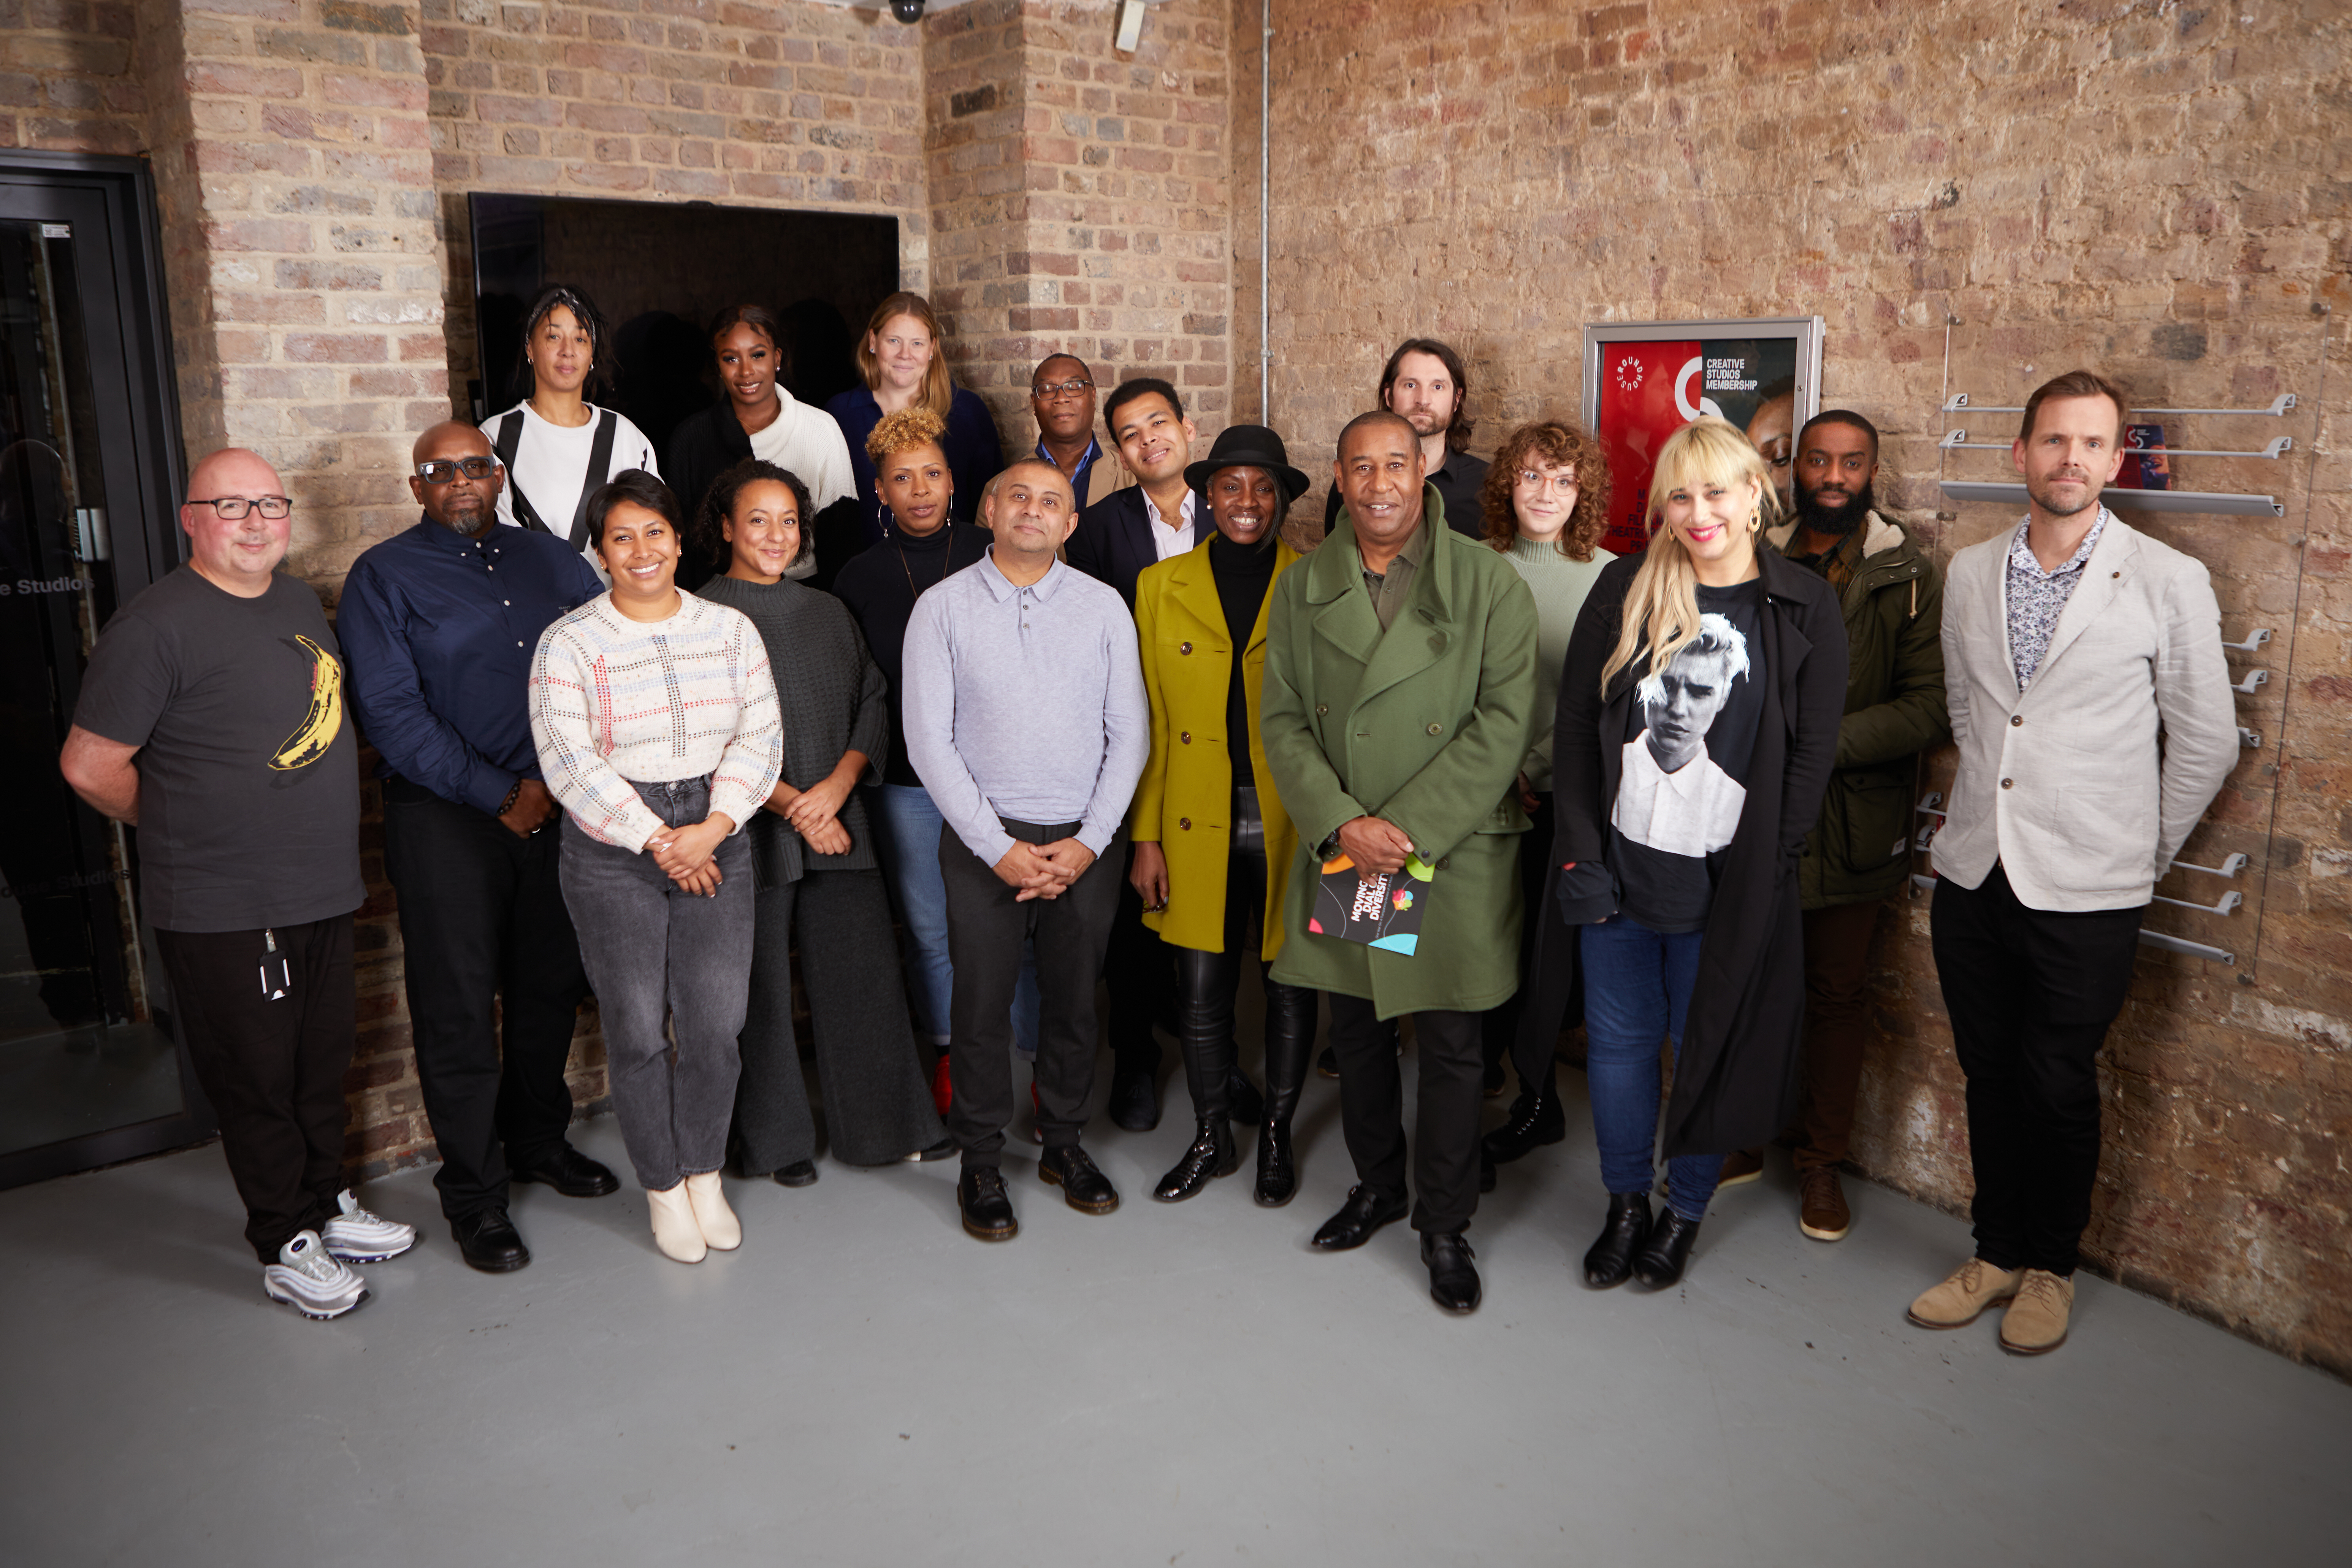 UK Music's diversity taskforce huddled together in a group picture